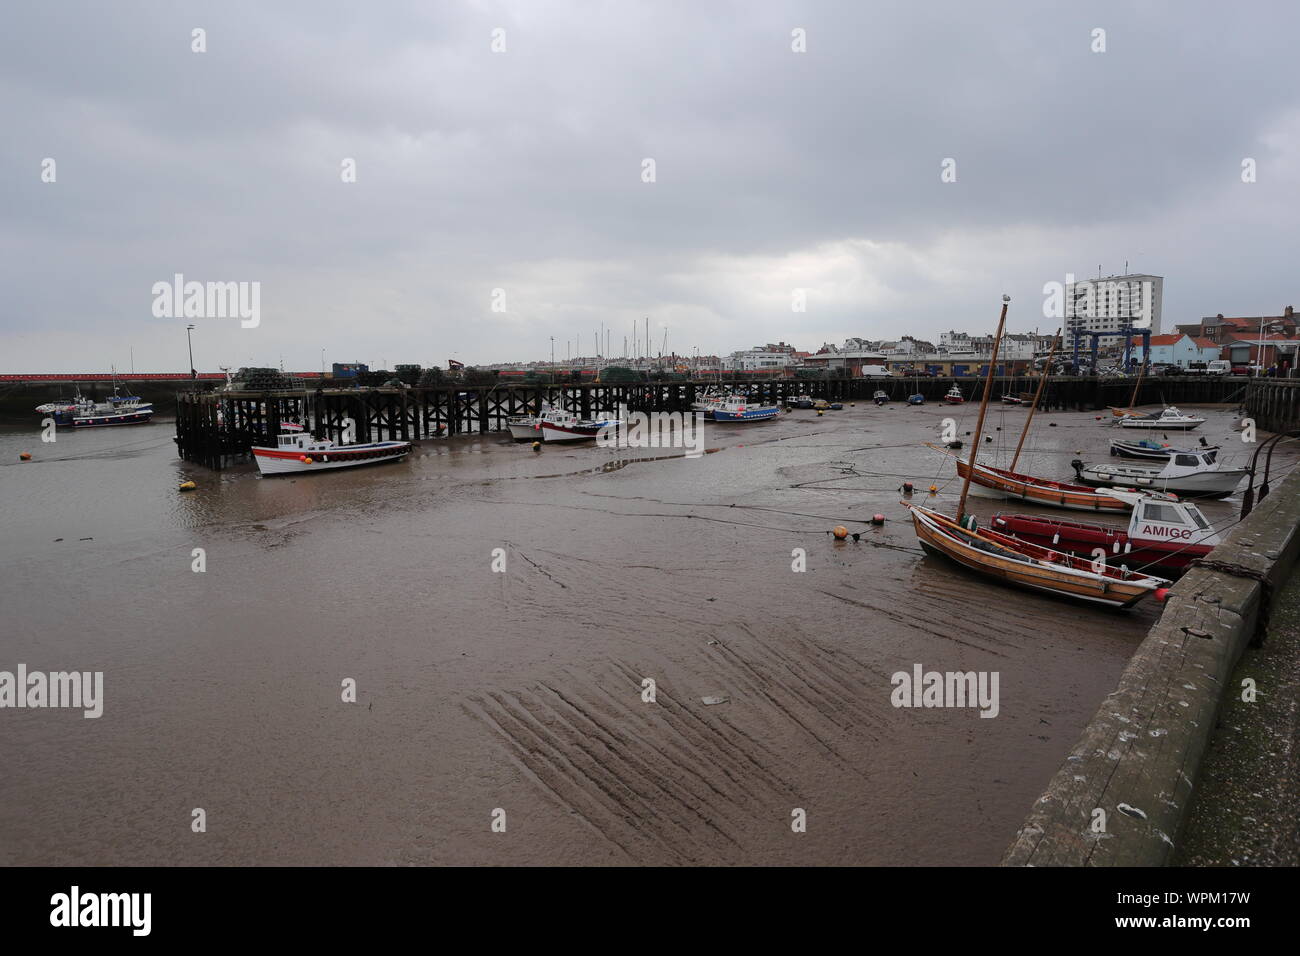 Bridlington harbour at low tide. Bridlington is a tidal harbour which leaves boats stranded when the tide goes out. Stock Photo